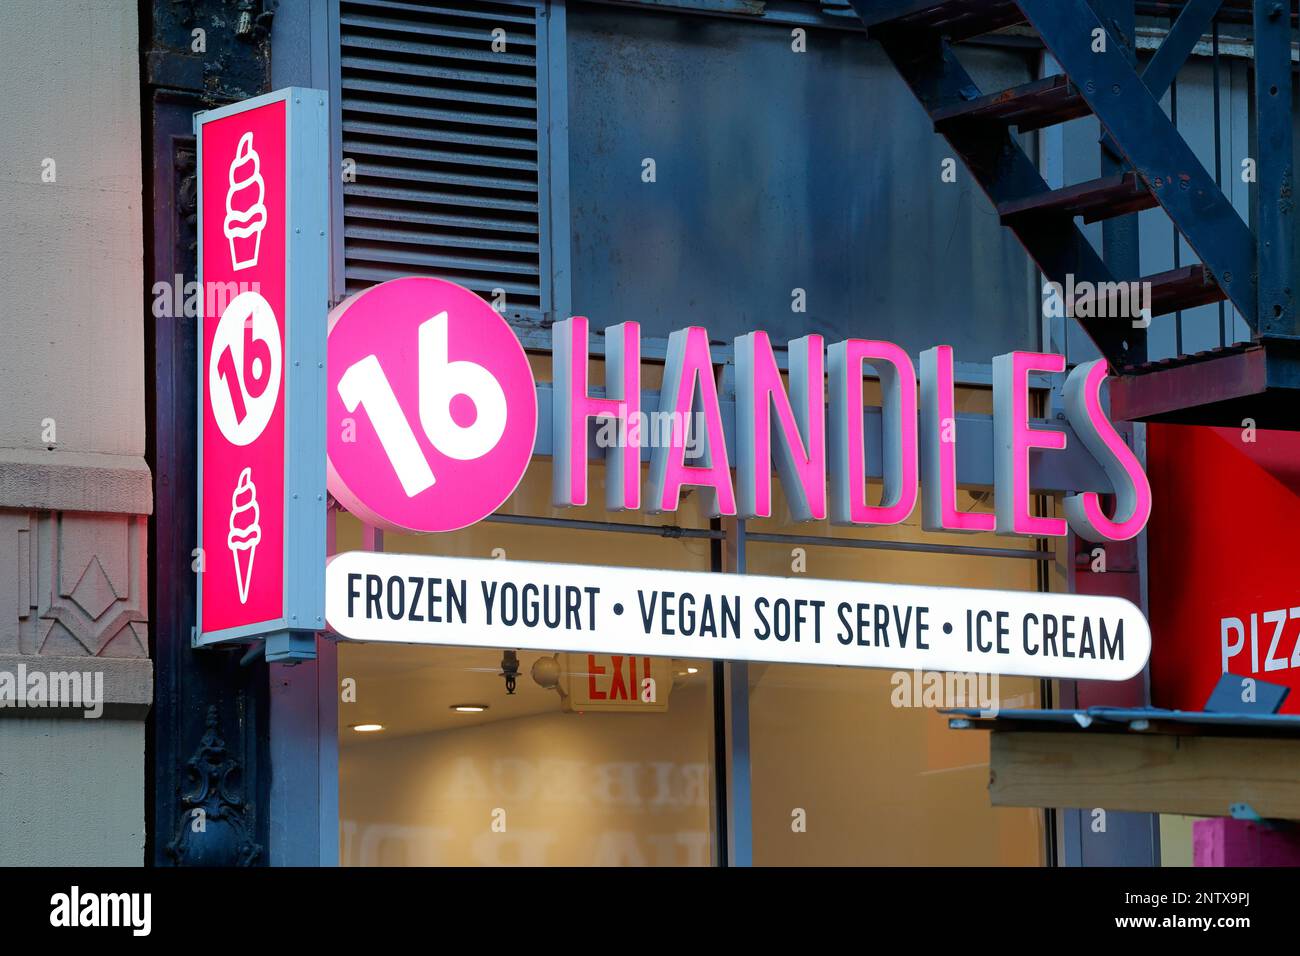 16 Handles frozen yogurt signage at one of their dessert stores in New York City Stock Photo